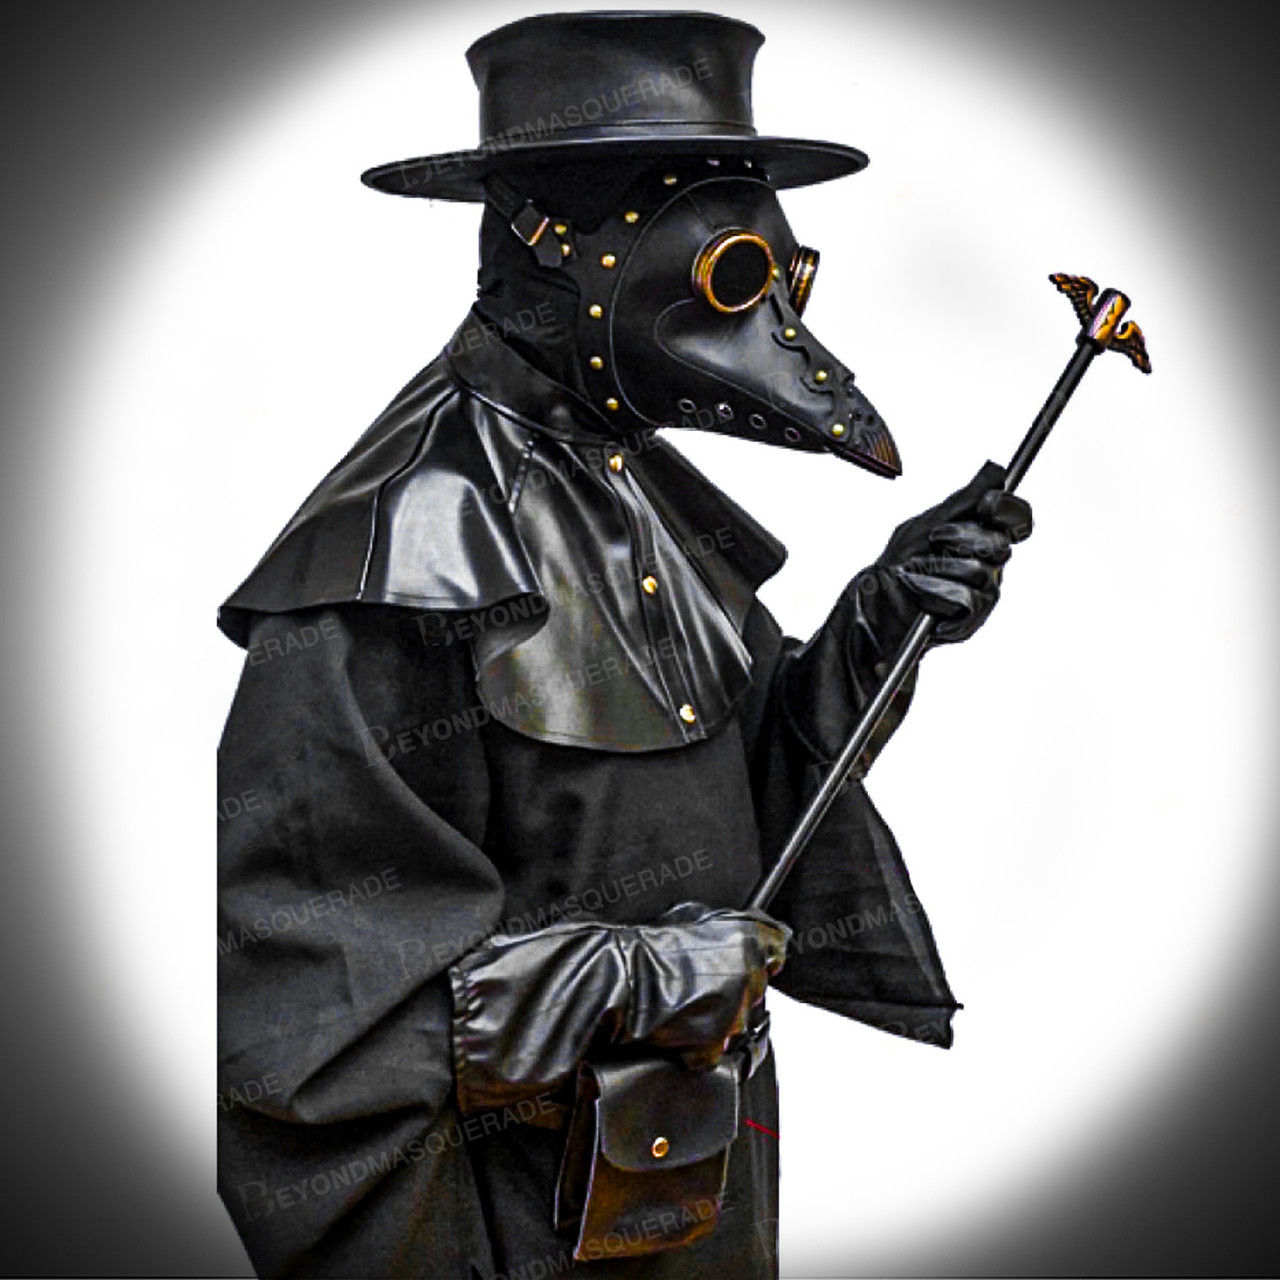 https://cdn11.bigcommerce.com/s-40v409mhy5/images/stencil/1280x1280/products/2519/23208/plague_doctor_costume-2nd__05270.1620943131.jpg?c=2